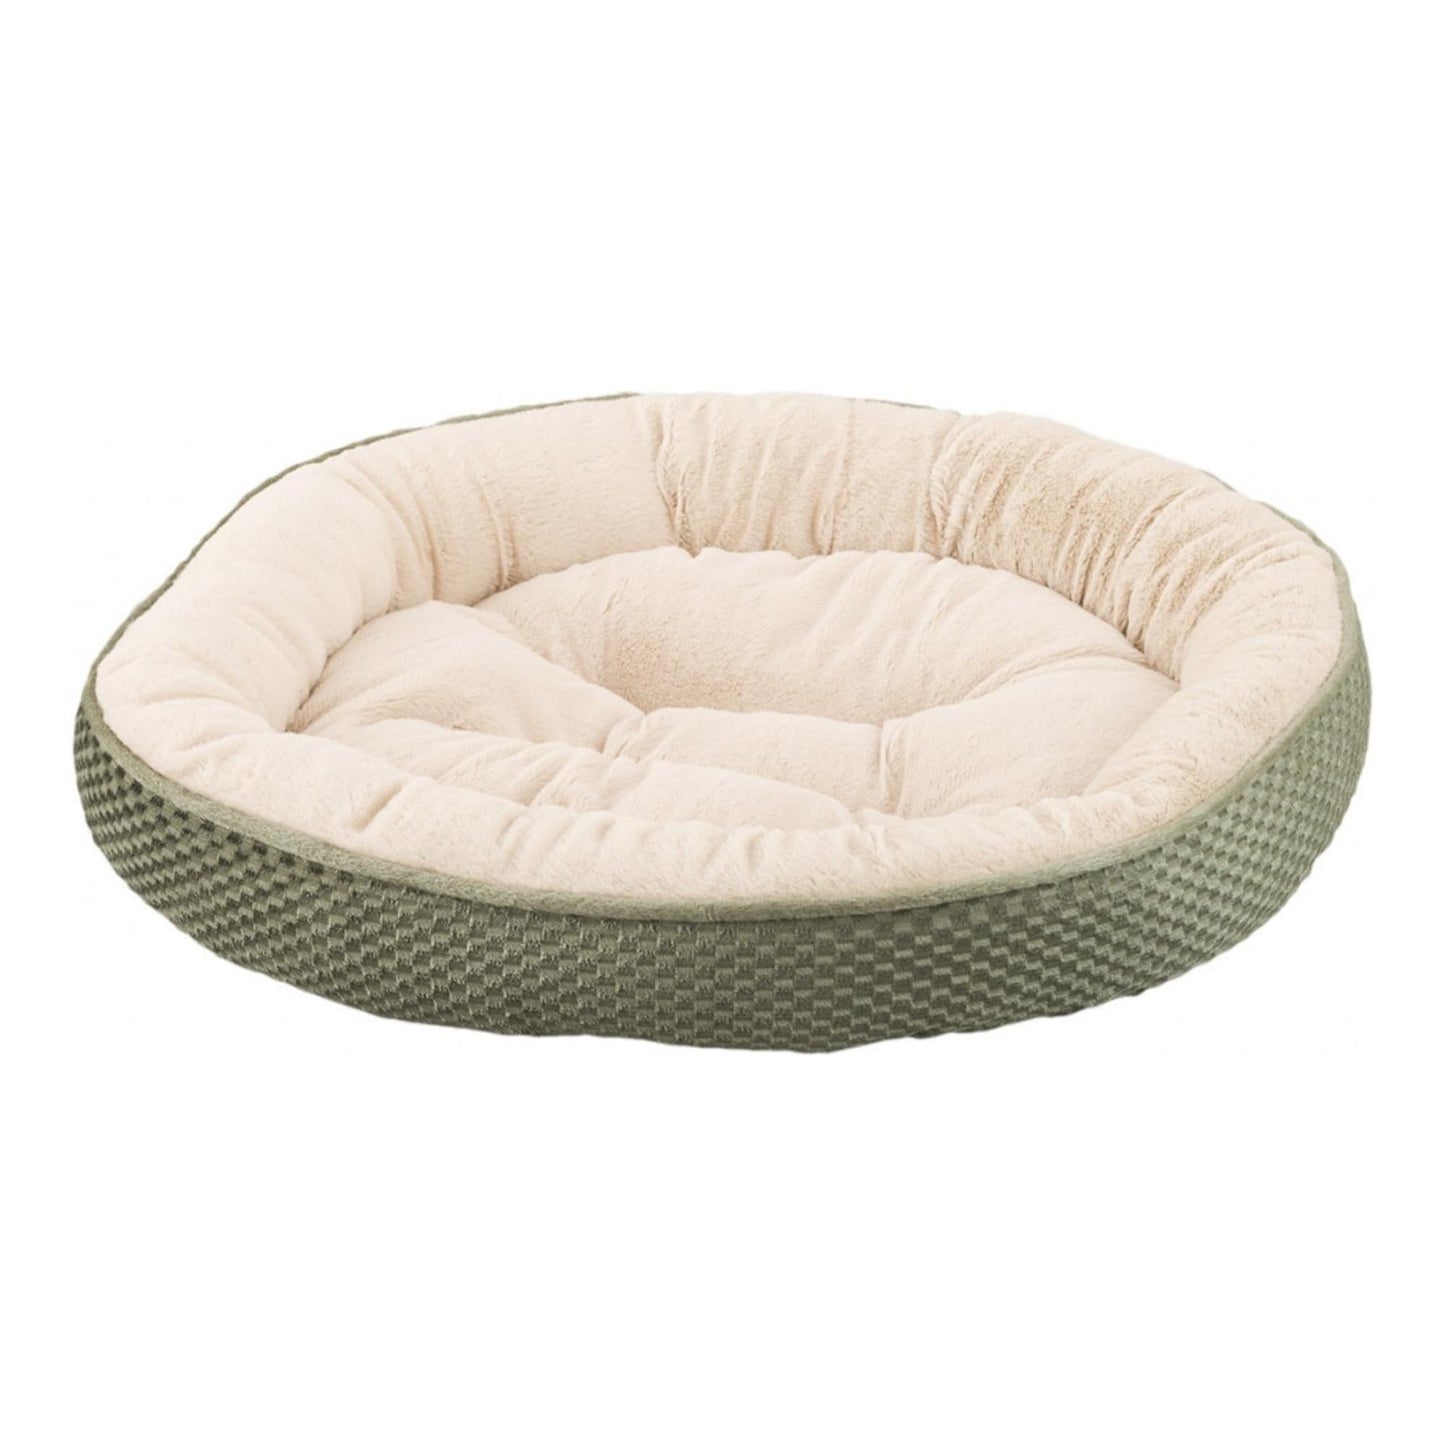 Ethical Pet Sleep Zone Checkerboard Napper 20" Sage